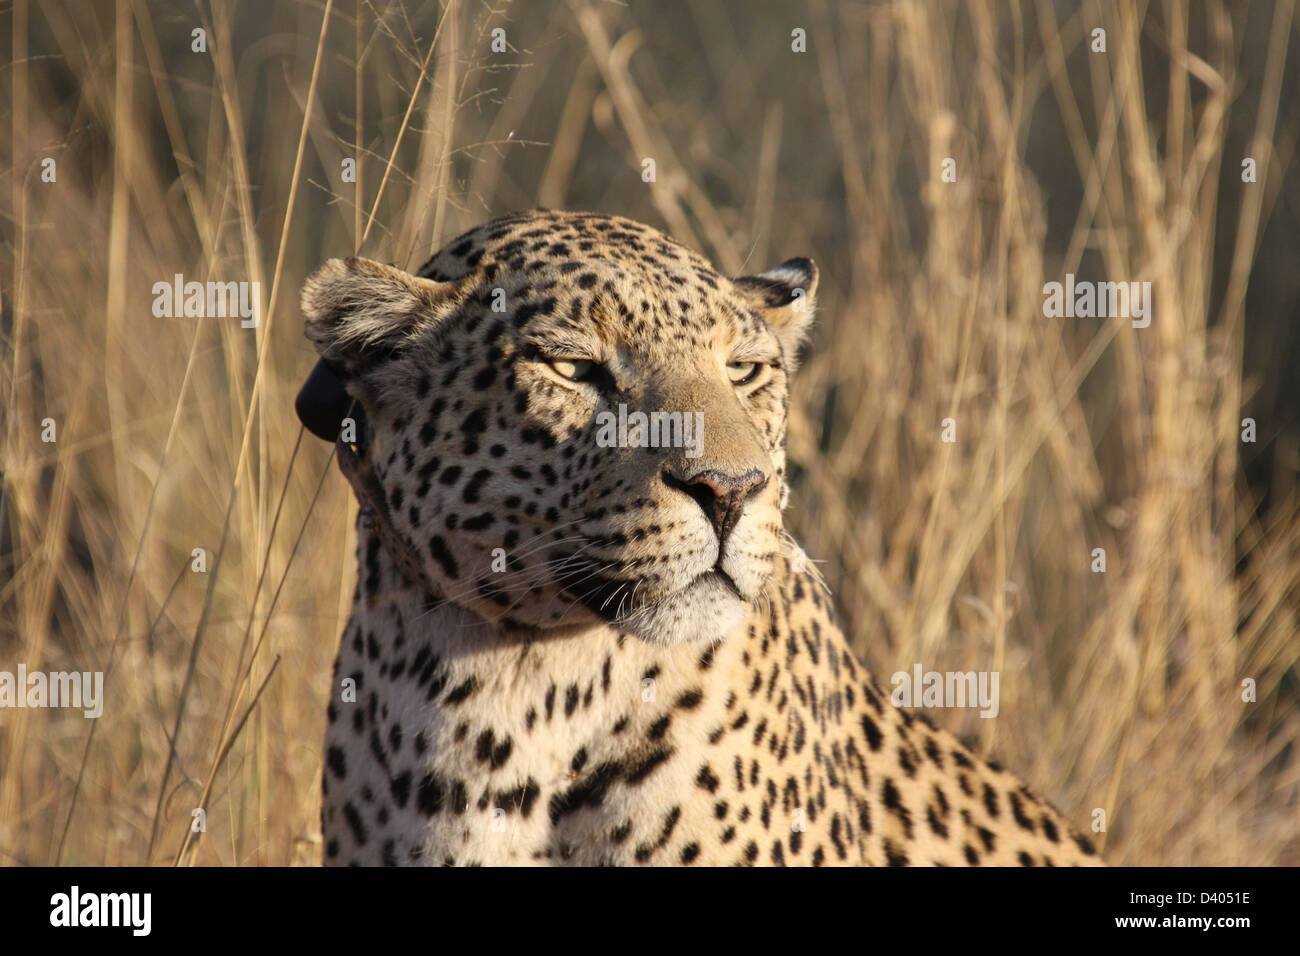 Leopard with collar, Africat Foundation, Namibia, south Africa Stock Photo